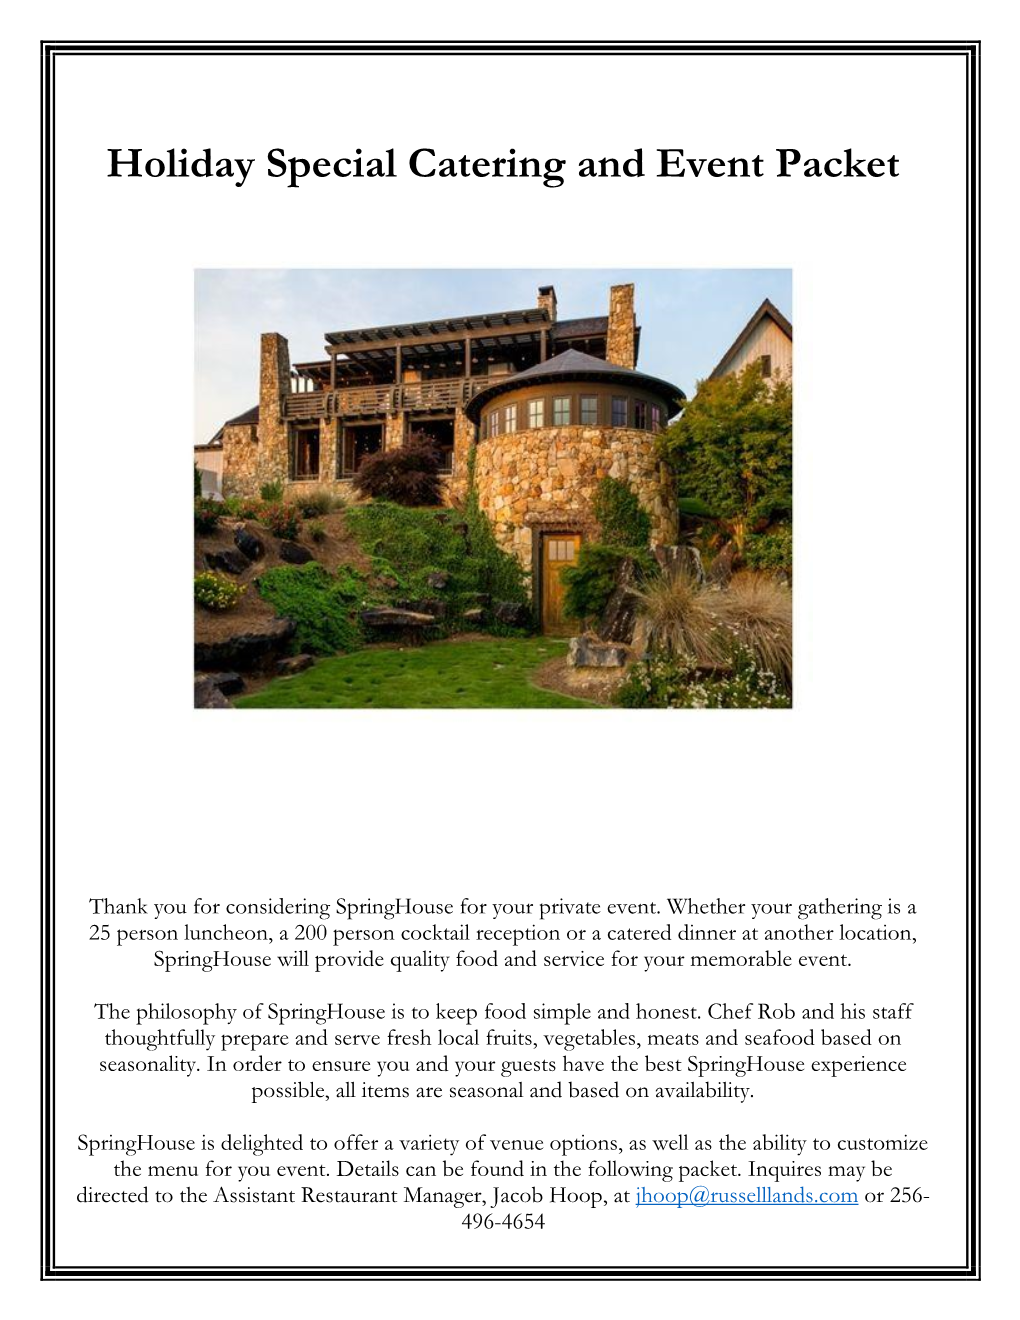 Holiday Special Catering and Event Packet